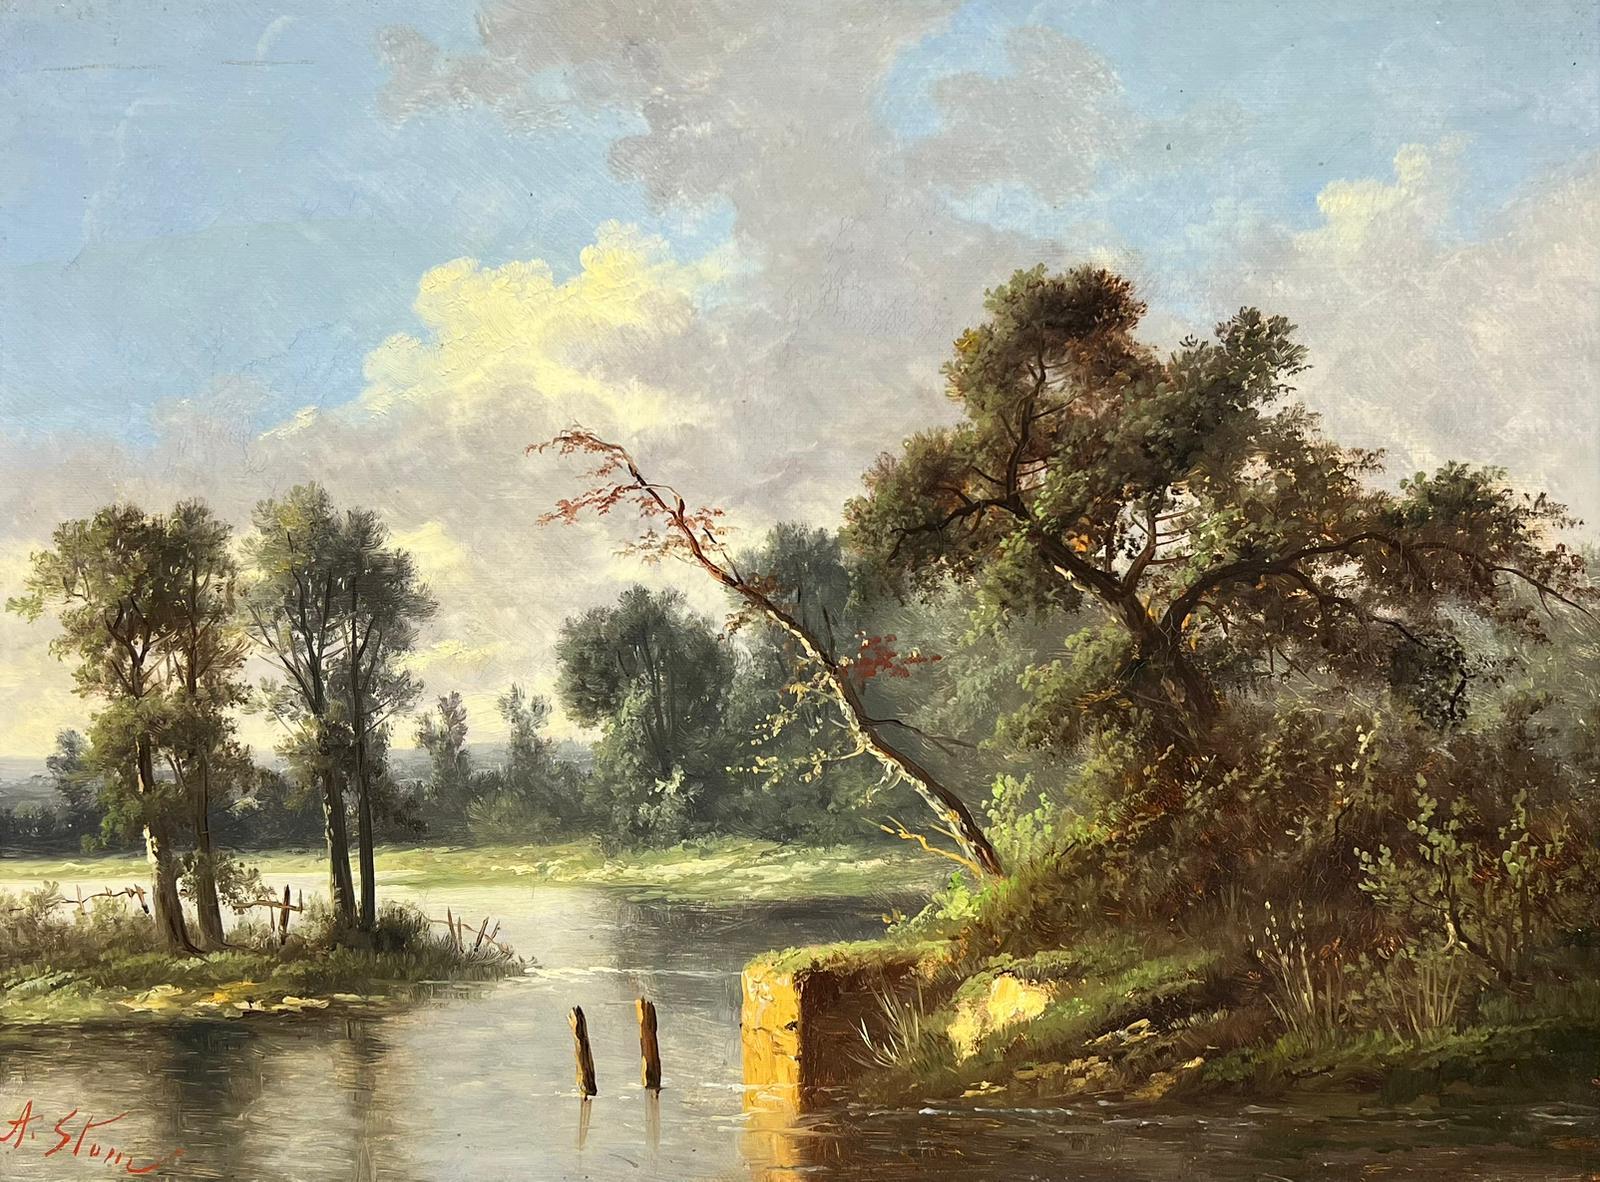 19th century tranquil paintings